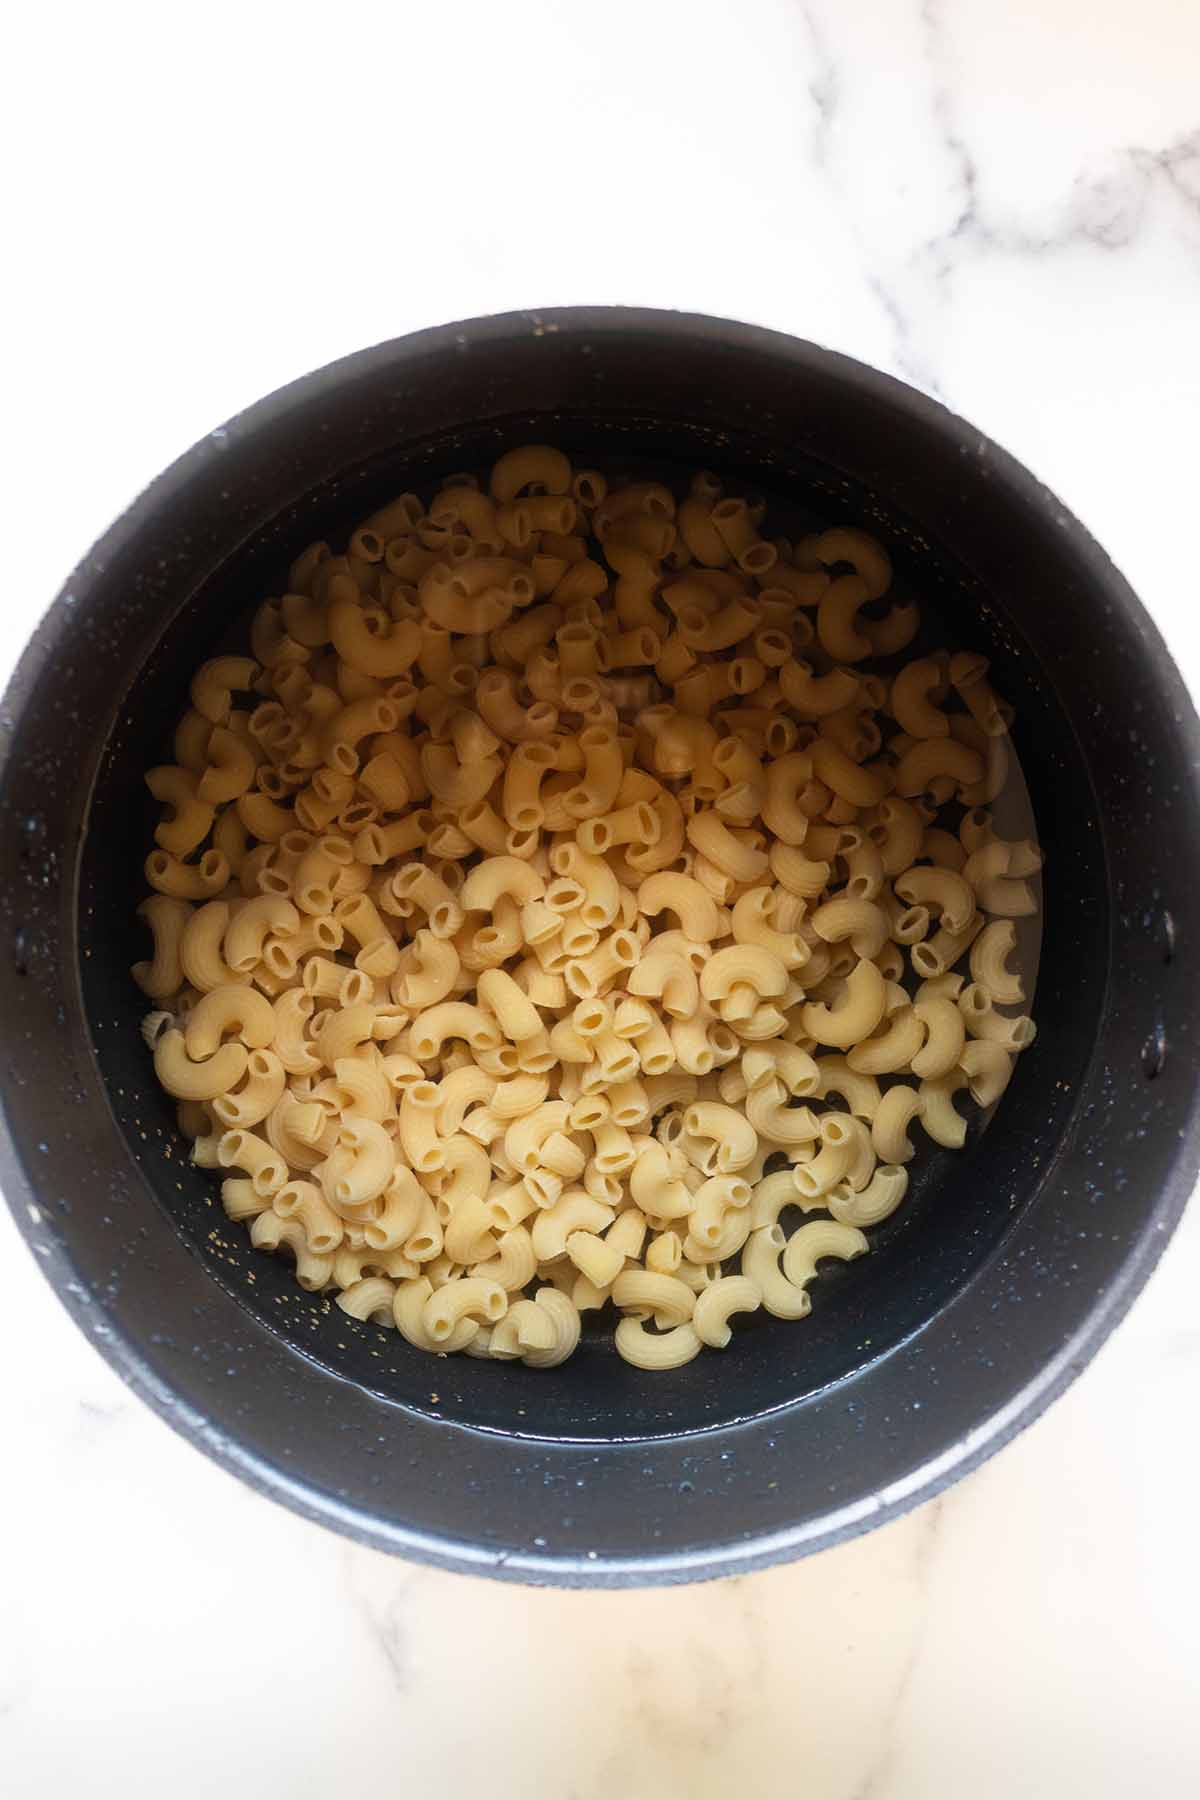 Overhead view of uncooked macaroni in a pot with water.